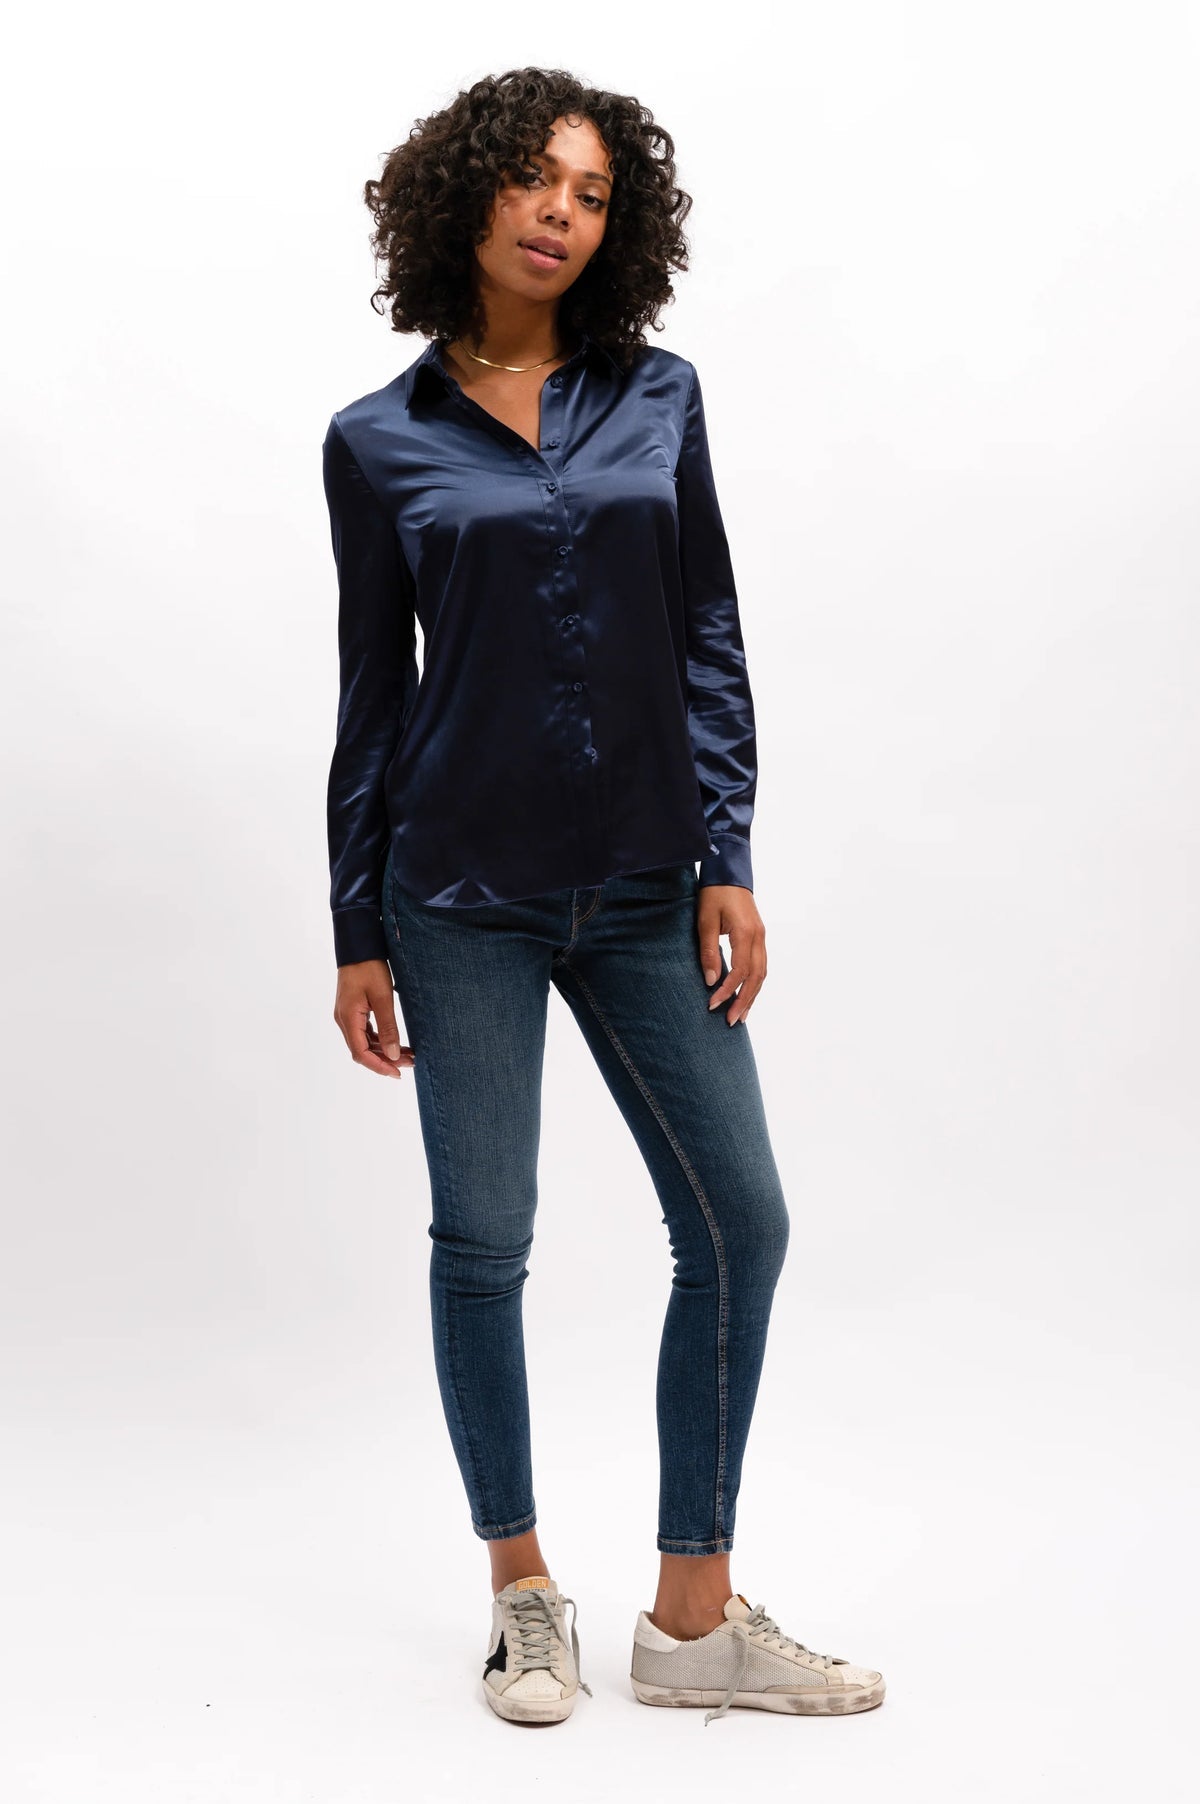 This rich midnight coloured Carmen shirt by We Are The Others is crafted for a lasting, polished look. Featuring our core Satin shirt fit, self-covered button detail at center front & cuff openings, and a shaped hem, this shirt guarantees a smart, sophisticated style. Embodying modern and timeless elements, this design offers an updated take on a classic look. lemon cyprus boutique